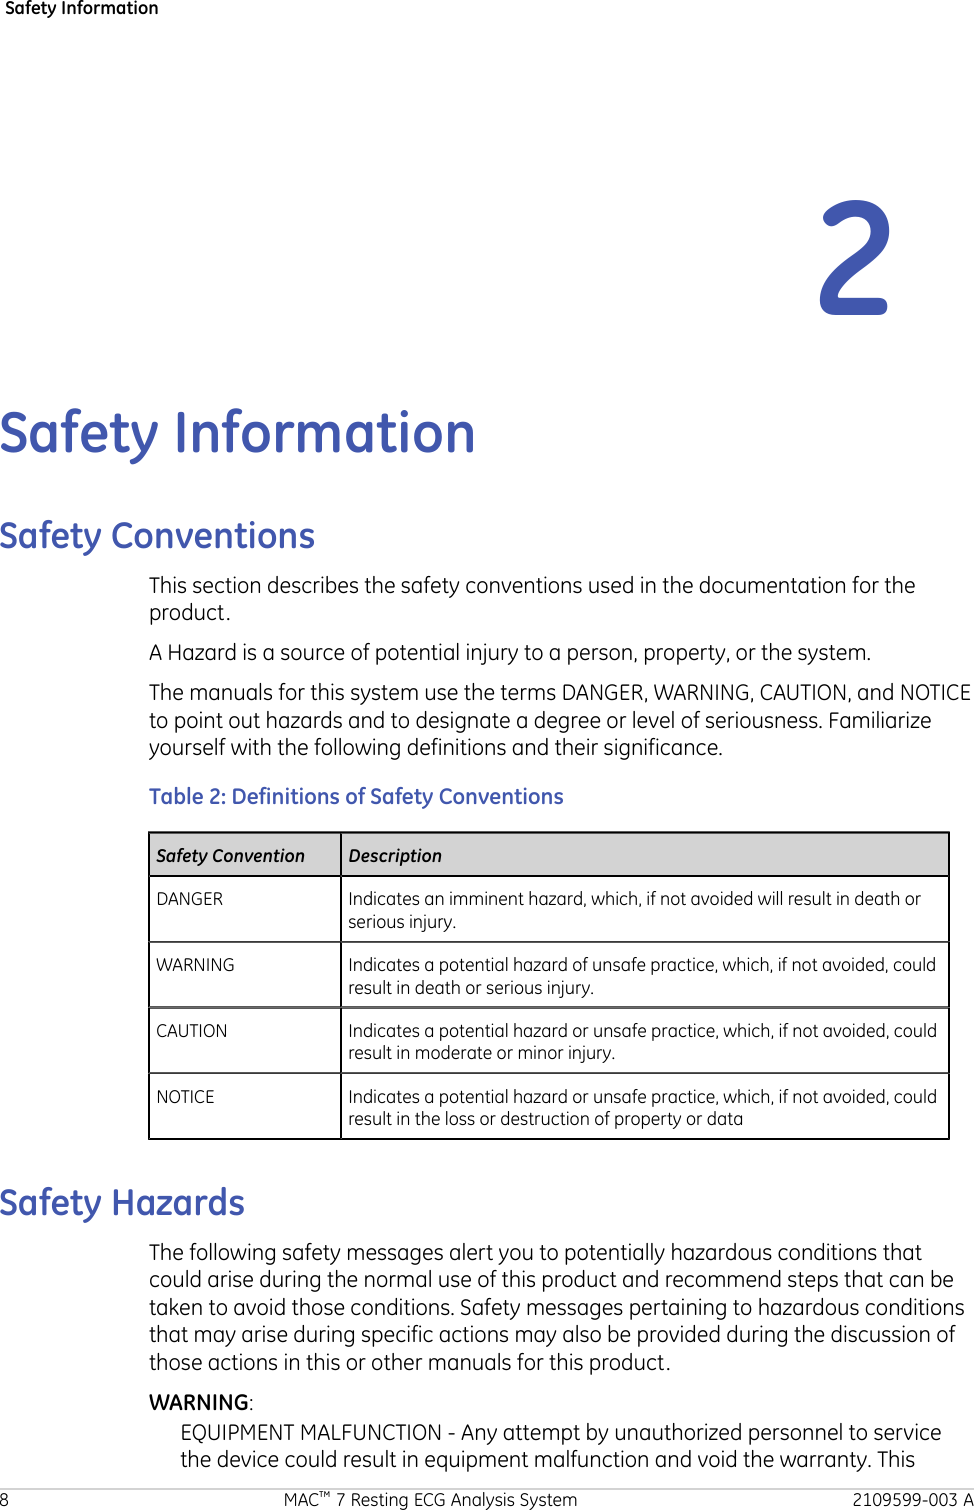 Safety Information2Safety InformationSafety ConventionsThis section describes the safety conventions used in the documentation for theproduct.A Hazard is a source of potential injury to a person, property, or the system.The manuals for this system use the terms DANGER, WARNING, CAUTION, and NOTICEto point out hazards and to designate a degree or level of seriousness. Familiarizeyourself with the following definitions and their significance.Table 2: Definitions of Safety ConventionsSafety Convention DescriptionDANGER Indicates an imminent hazard, which, if not avoided will result in death orserious injury.WARNING Indicates a potential hazard of unsafe practice, which, if not avoided, couldresult in death or serious injury.CAUTION Indicates a potential hazard or unsafe practice, which, if not avoided, couldresult in moderate or minor injury.NOTICE Indicates a potential hazard or unsafe practice, which, if not avoided, couldresult in the loss or destruction of property or dataSafety HazardsThe following safety messages alert you to potentially hazardous conditions thatcould arise during the normal use of this product and recommend steps that can betaken to avoid those conditions. Safety messages pertaining to hazardous conditionsthat may arise during specific actions may also be provided during the discussion ofthose actions in this or other manuals for this product.WARNING:EQUIPMENT MALFUNCTION - Any attempt by unauthorized personnel to servicethe device could result in equipment malfunction and void the warranty. This8 MAC™ 7 Resting ECG Analysis System 2109599-003 A